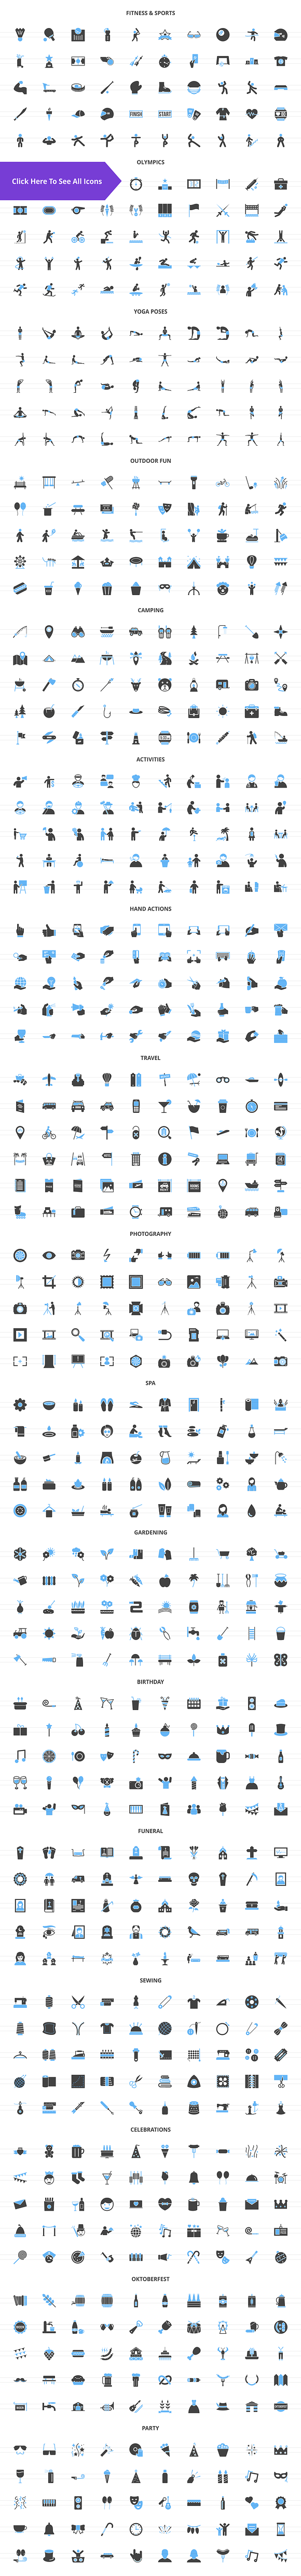 860 Activities Filled Icons in Graphics - product preview 1